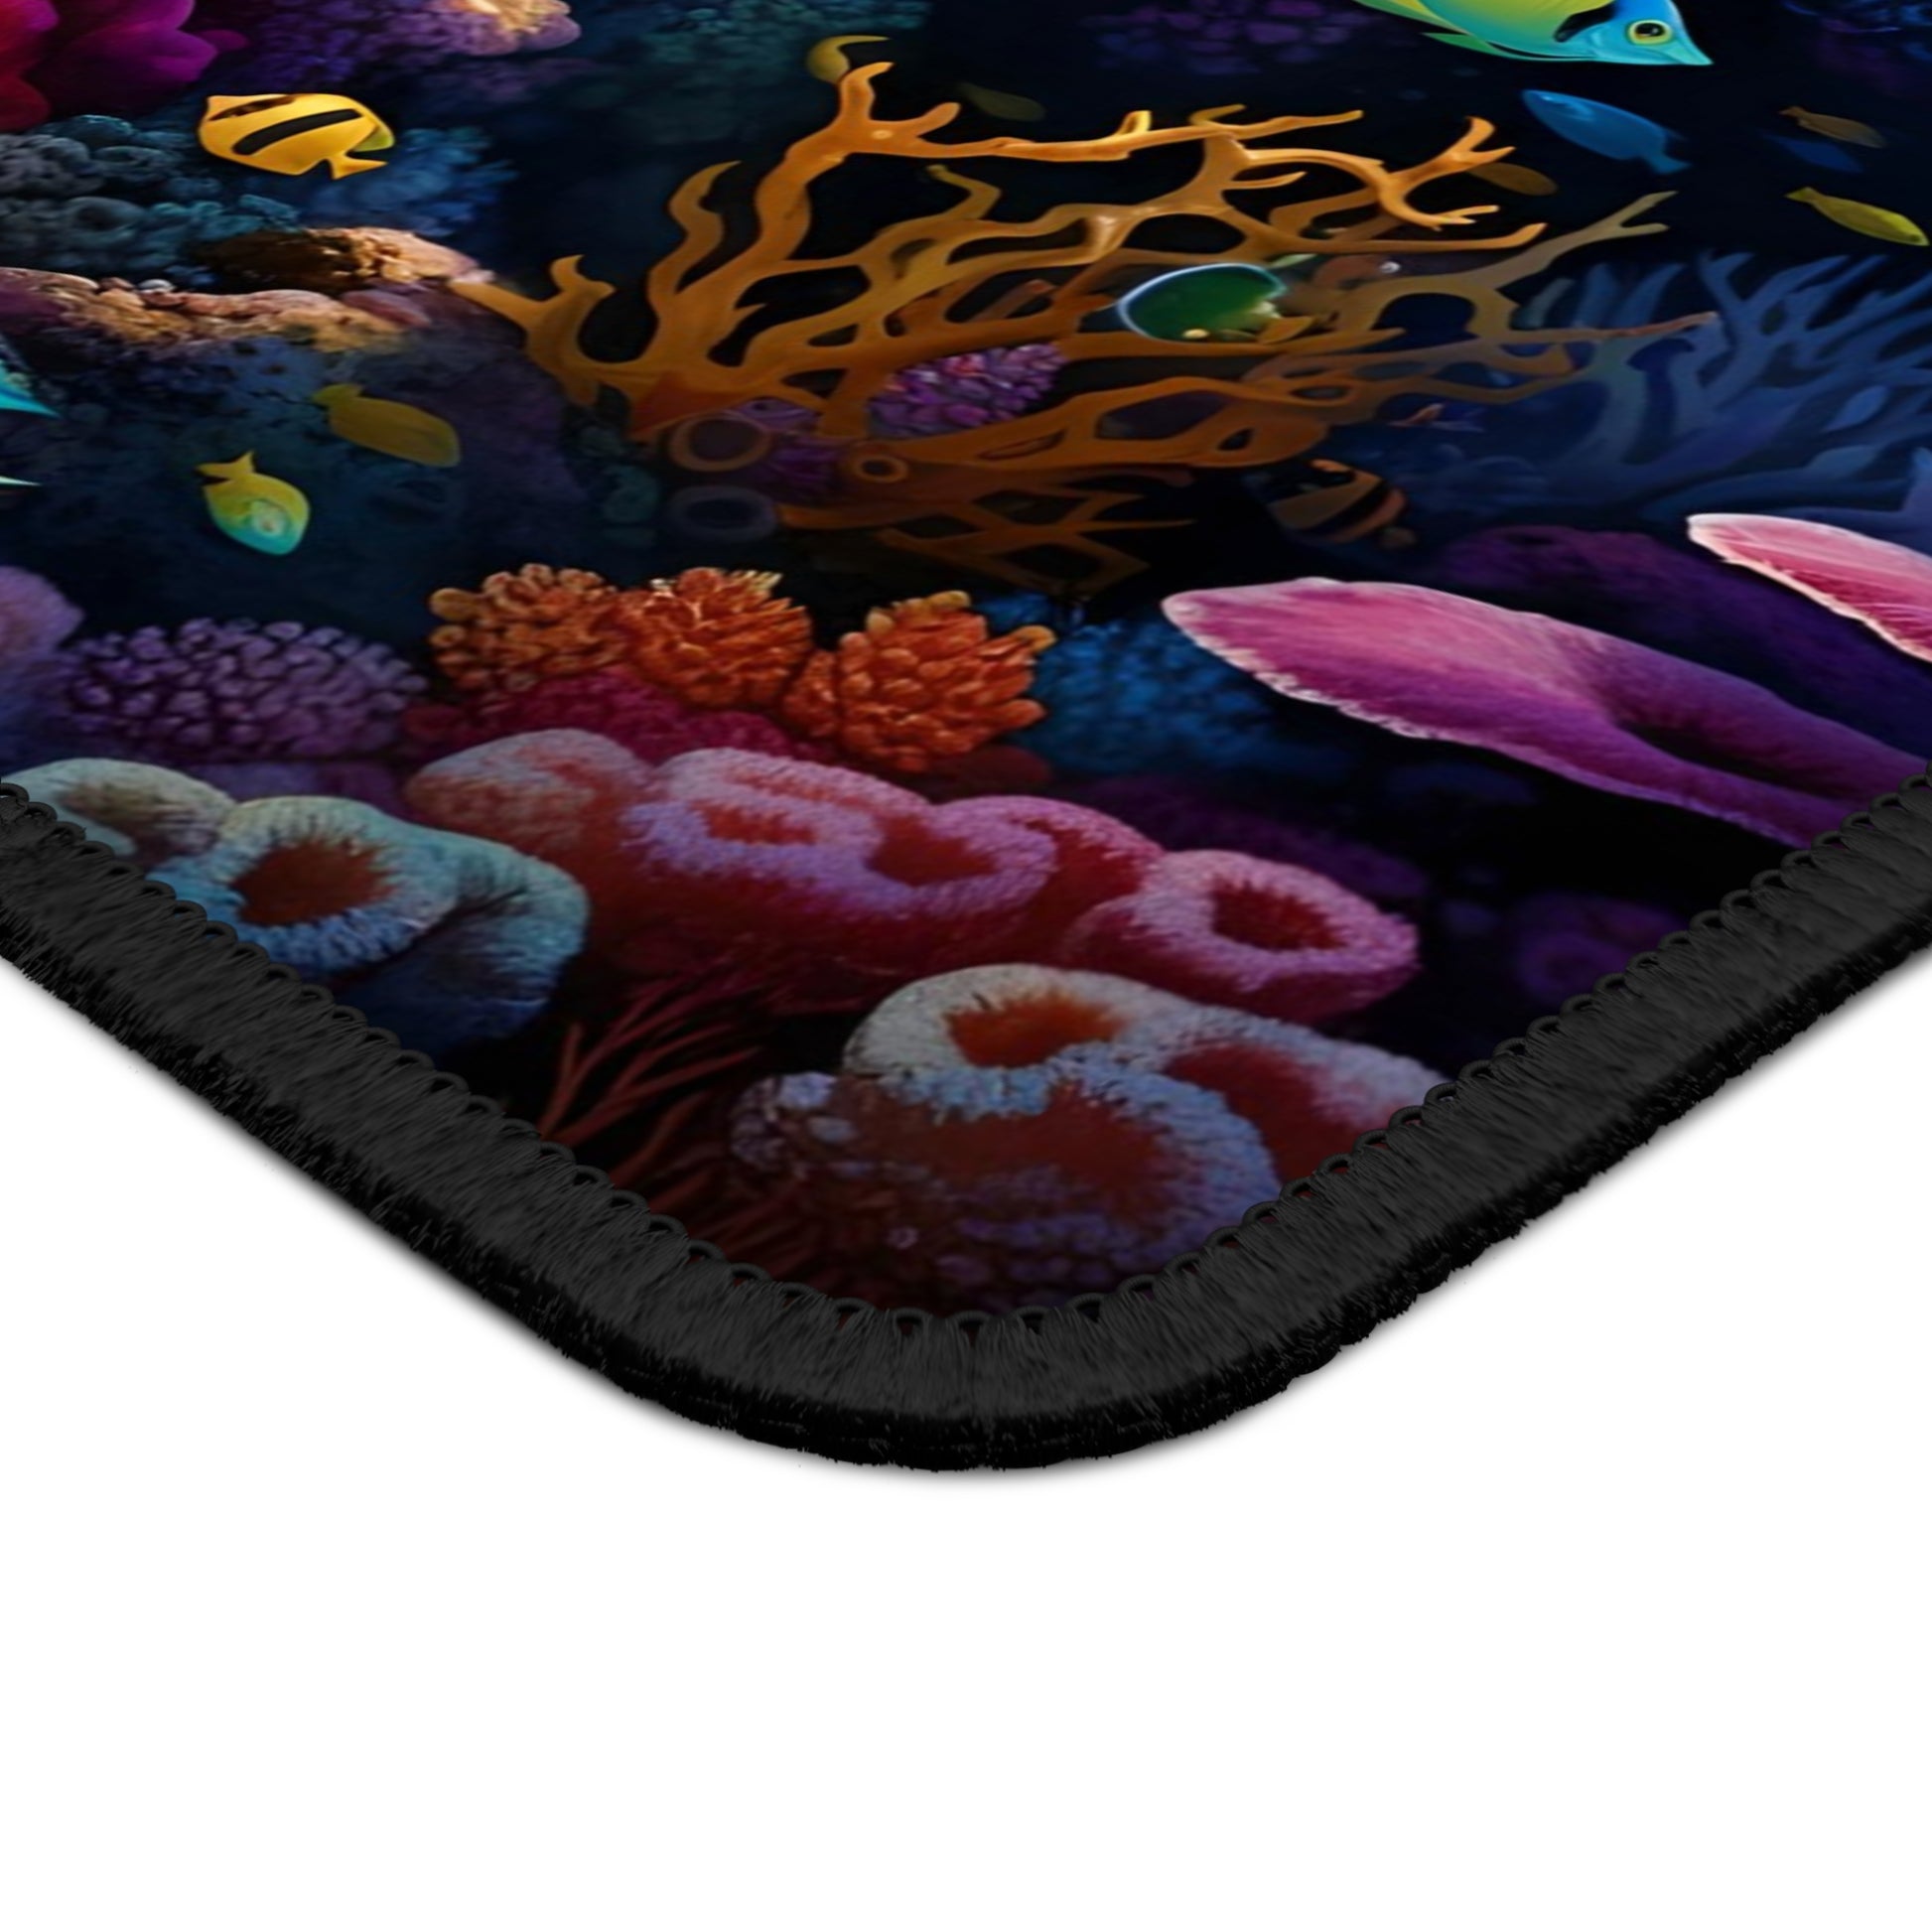 Tranquility of the Reef - Reef of Clowns LLC